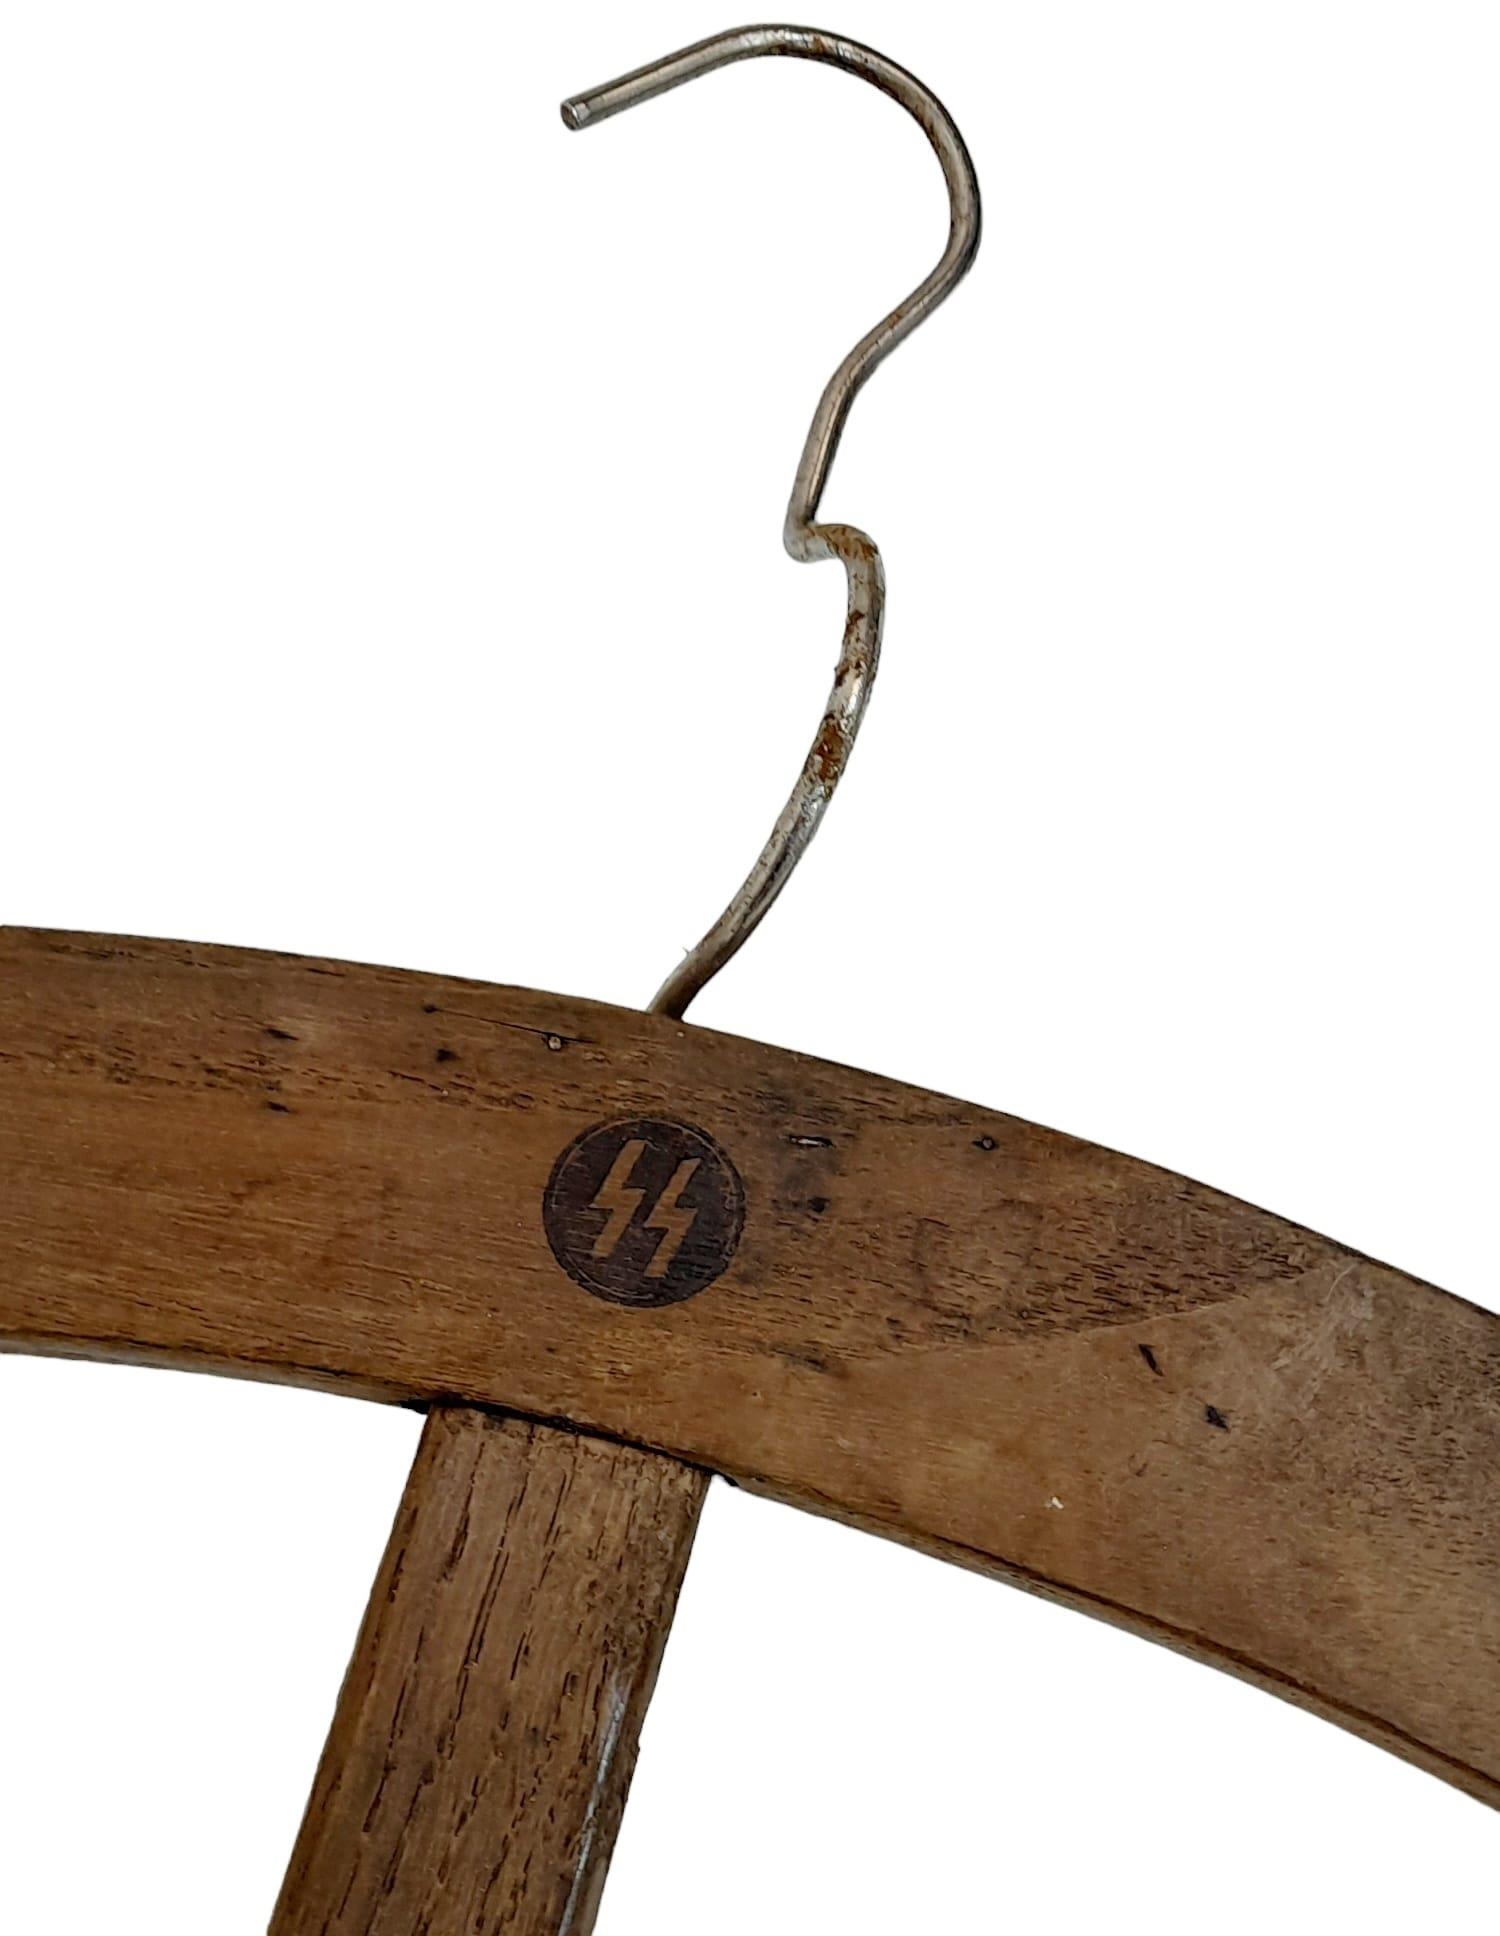 WW2 Waffen SS Clothes Hanger. - Image 6 of 7